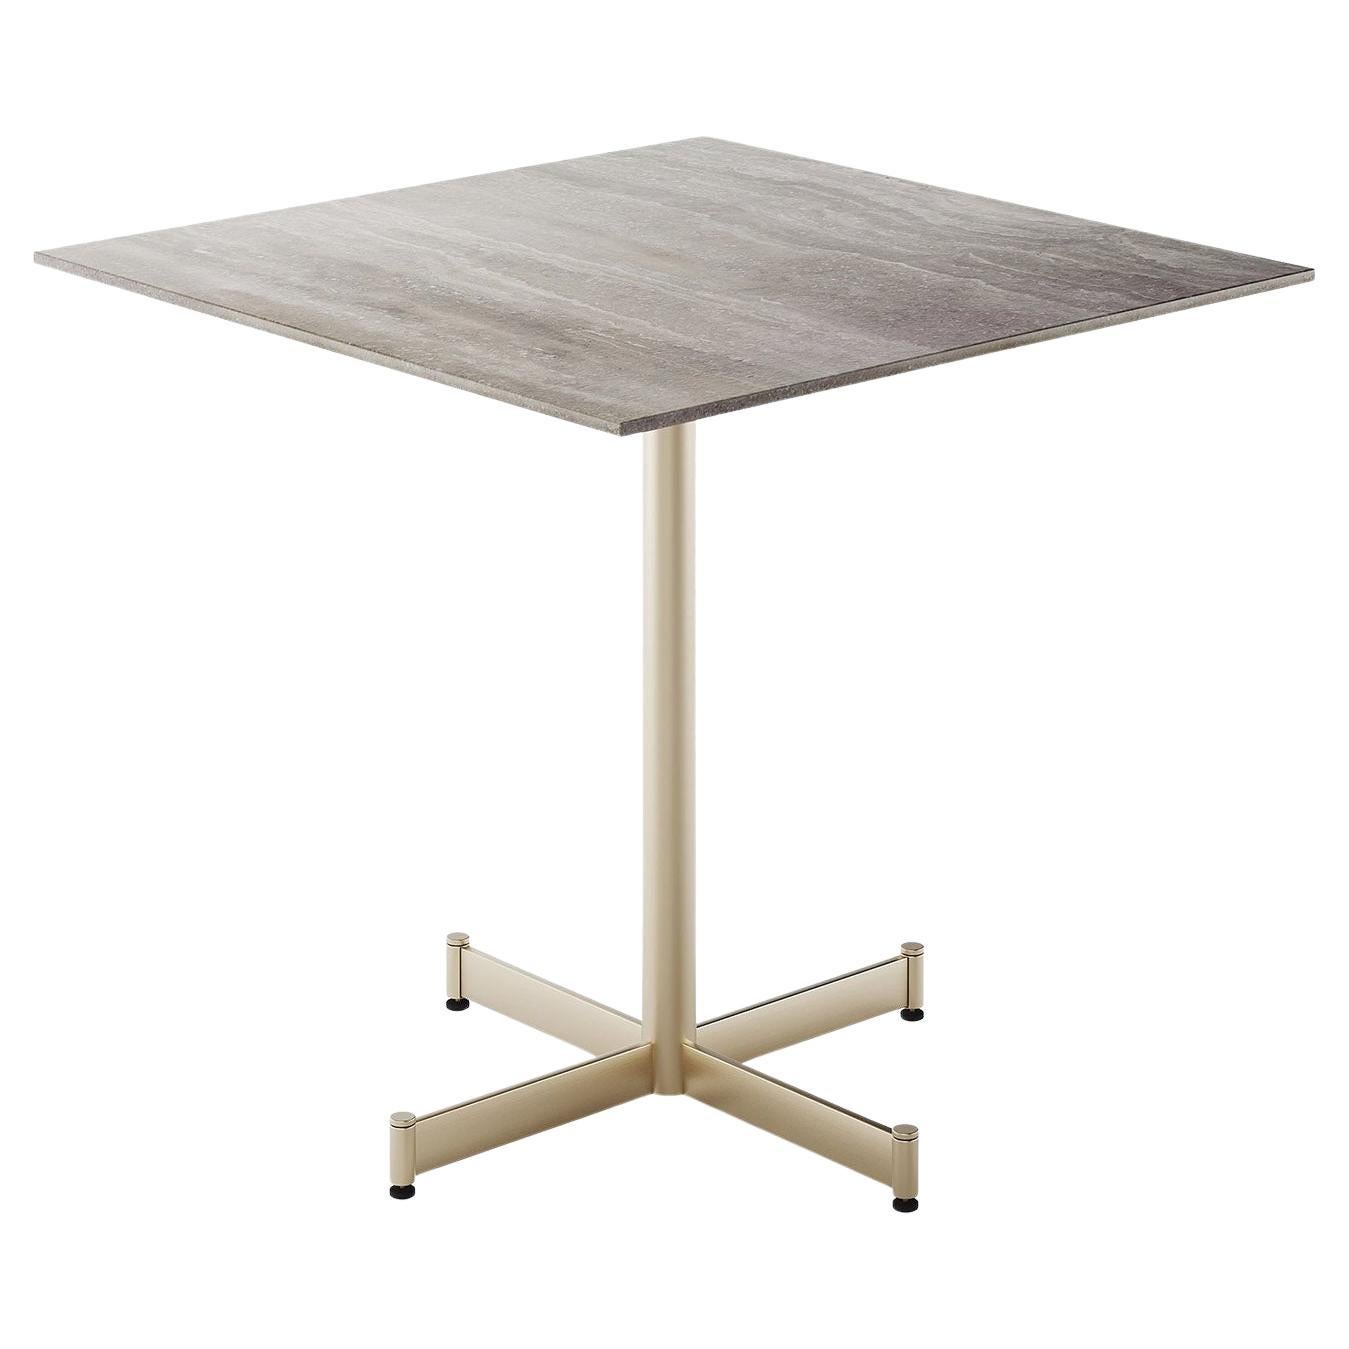 Fly Square Gray & Champagne Café Table by Braid Design Lab